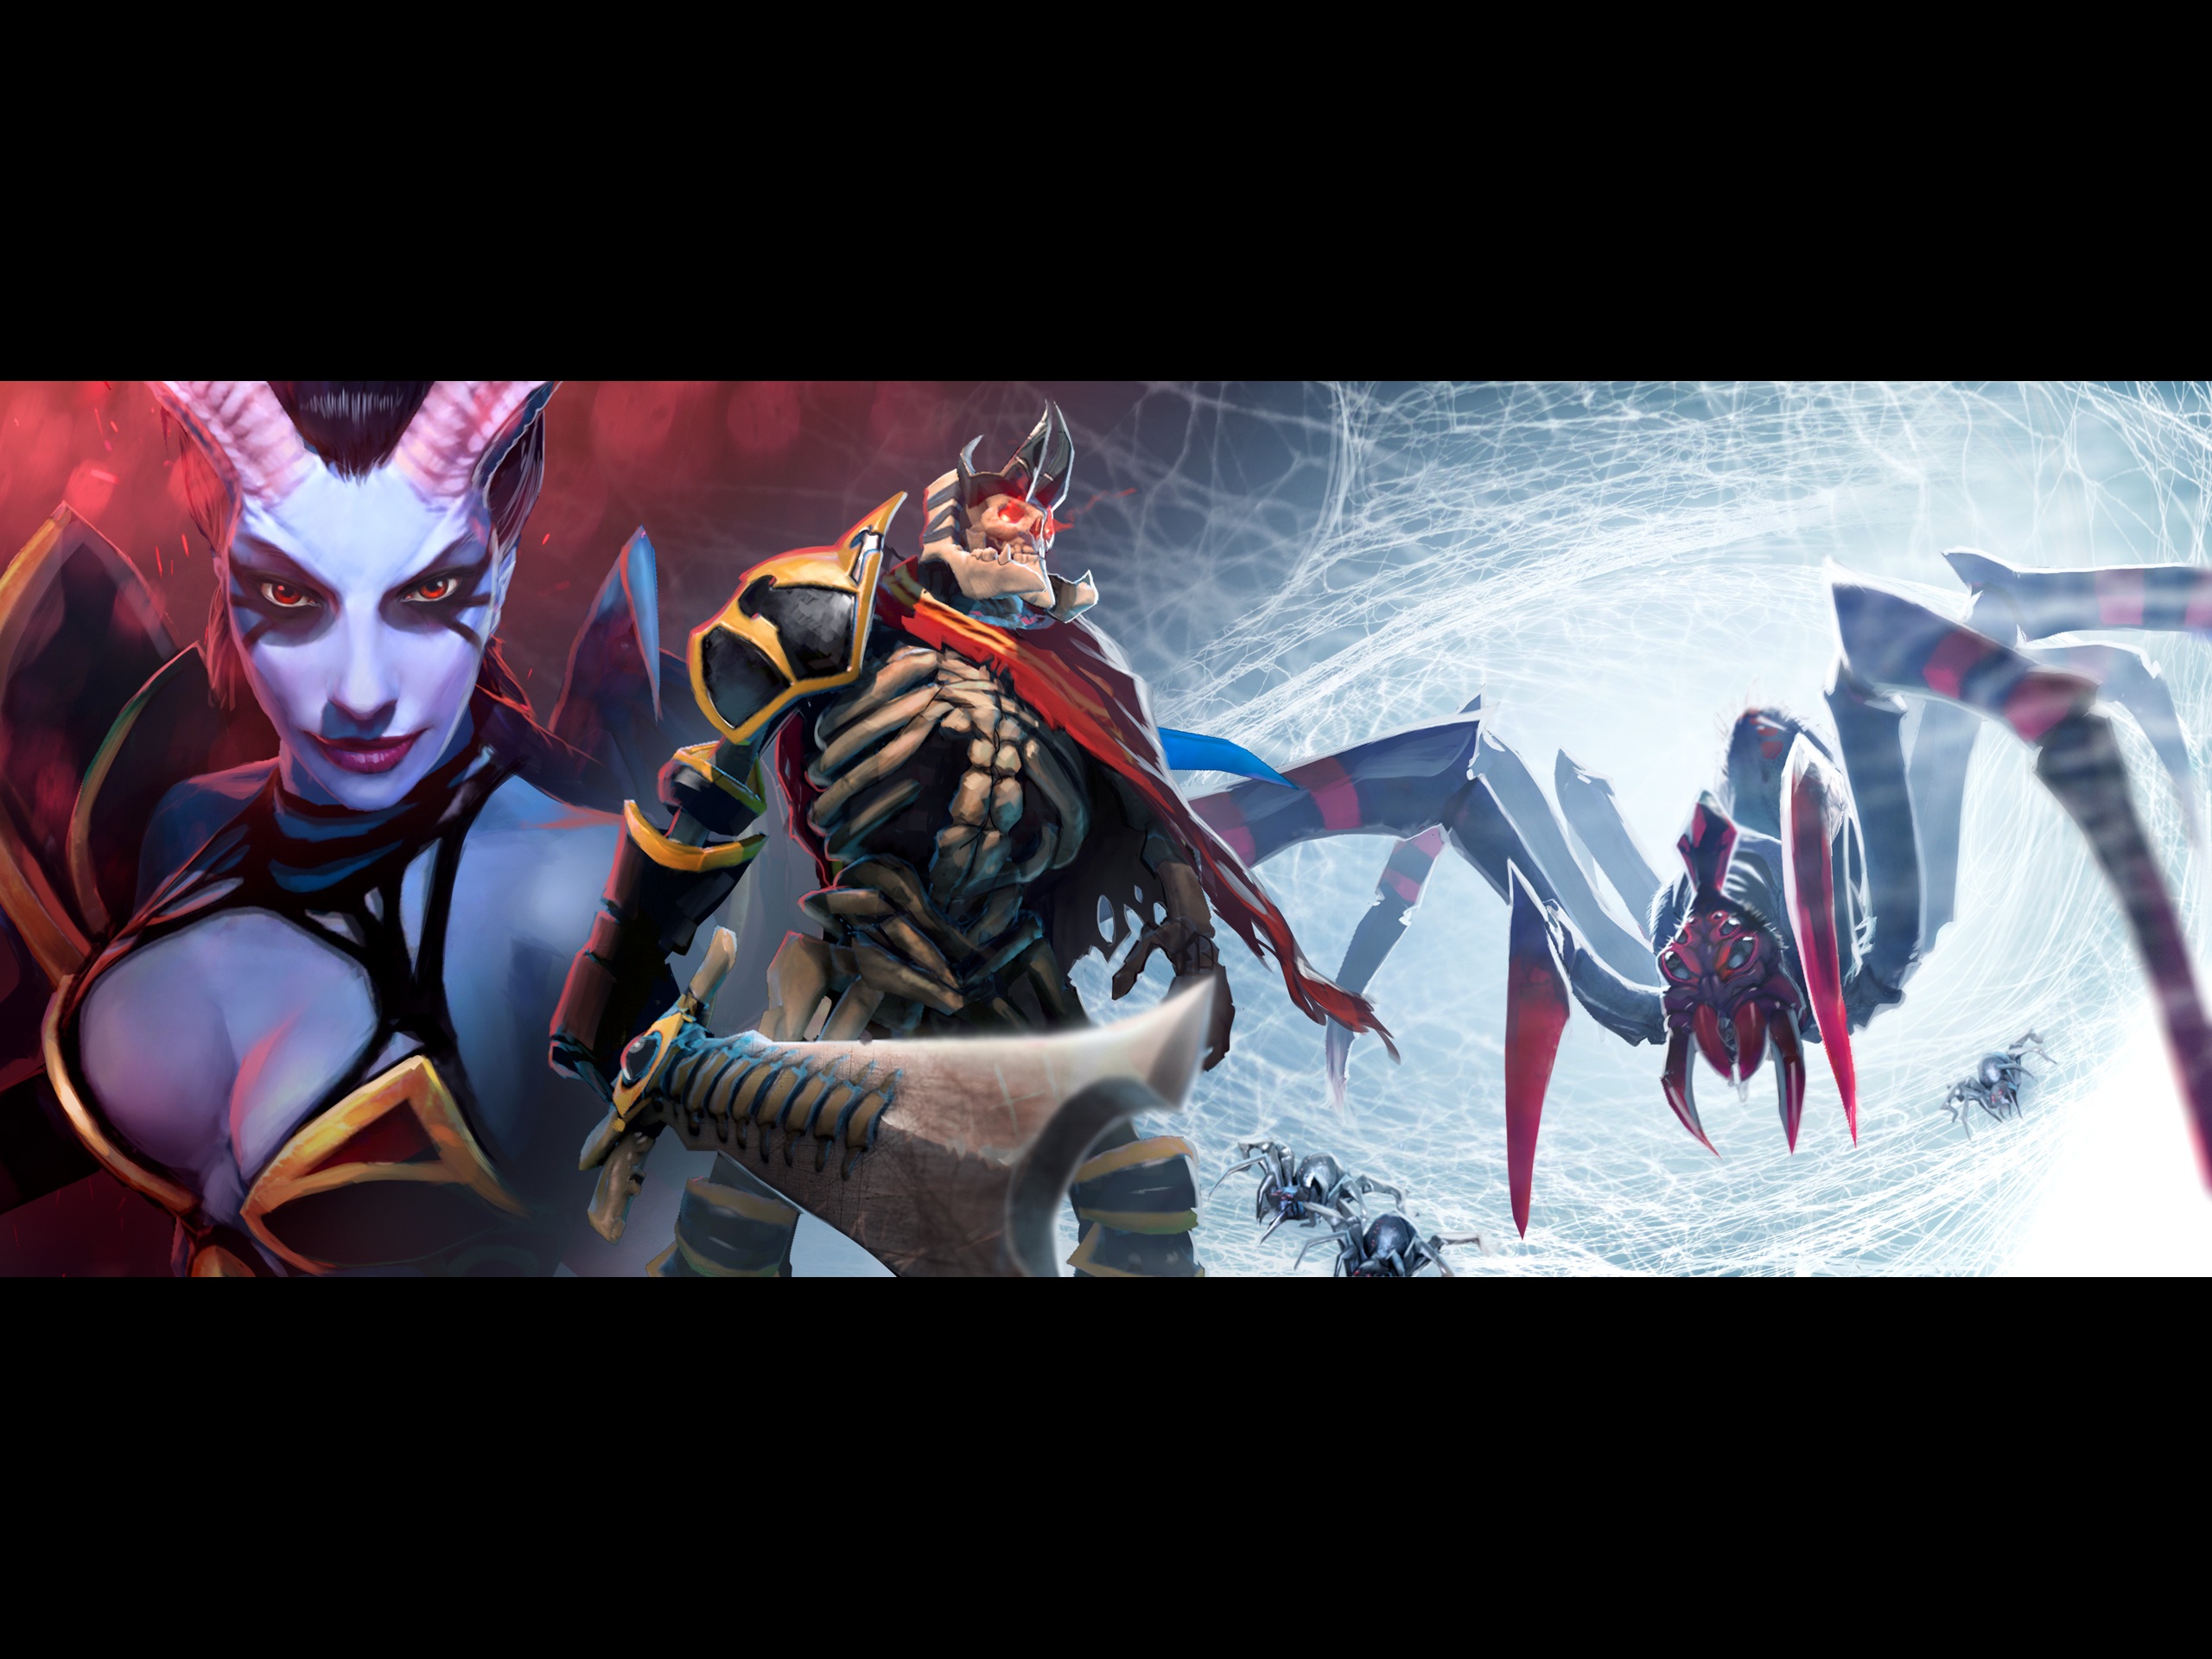 Queen Of Pain, Skeleton King And Broodmother Standard - Fantasy Skeleton King Skeleton - HD Wallpaper 